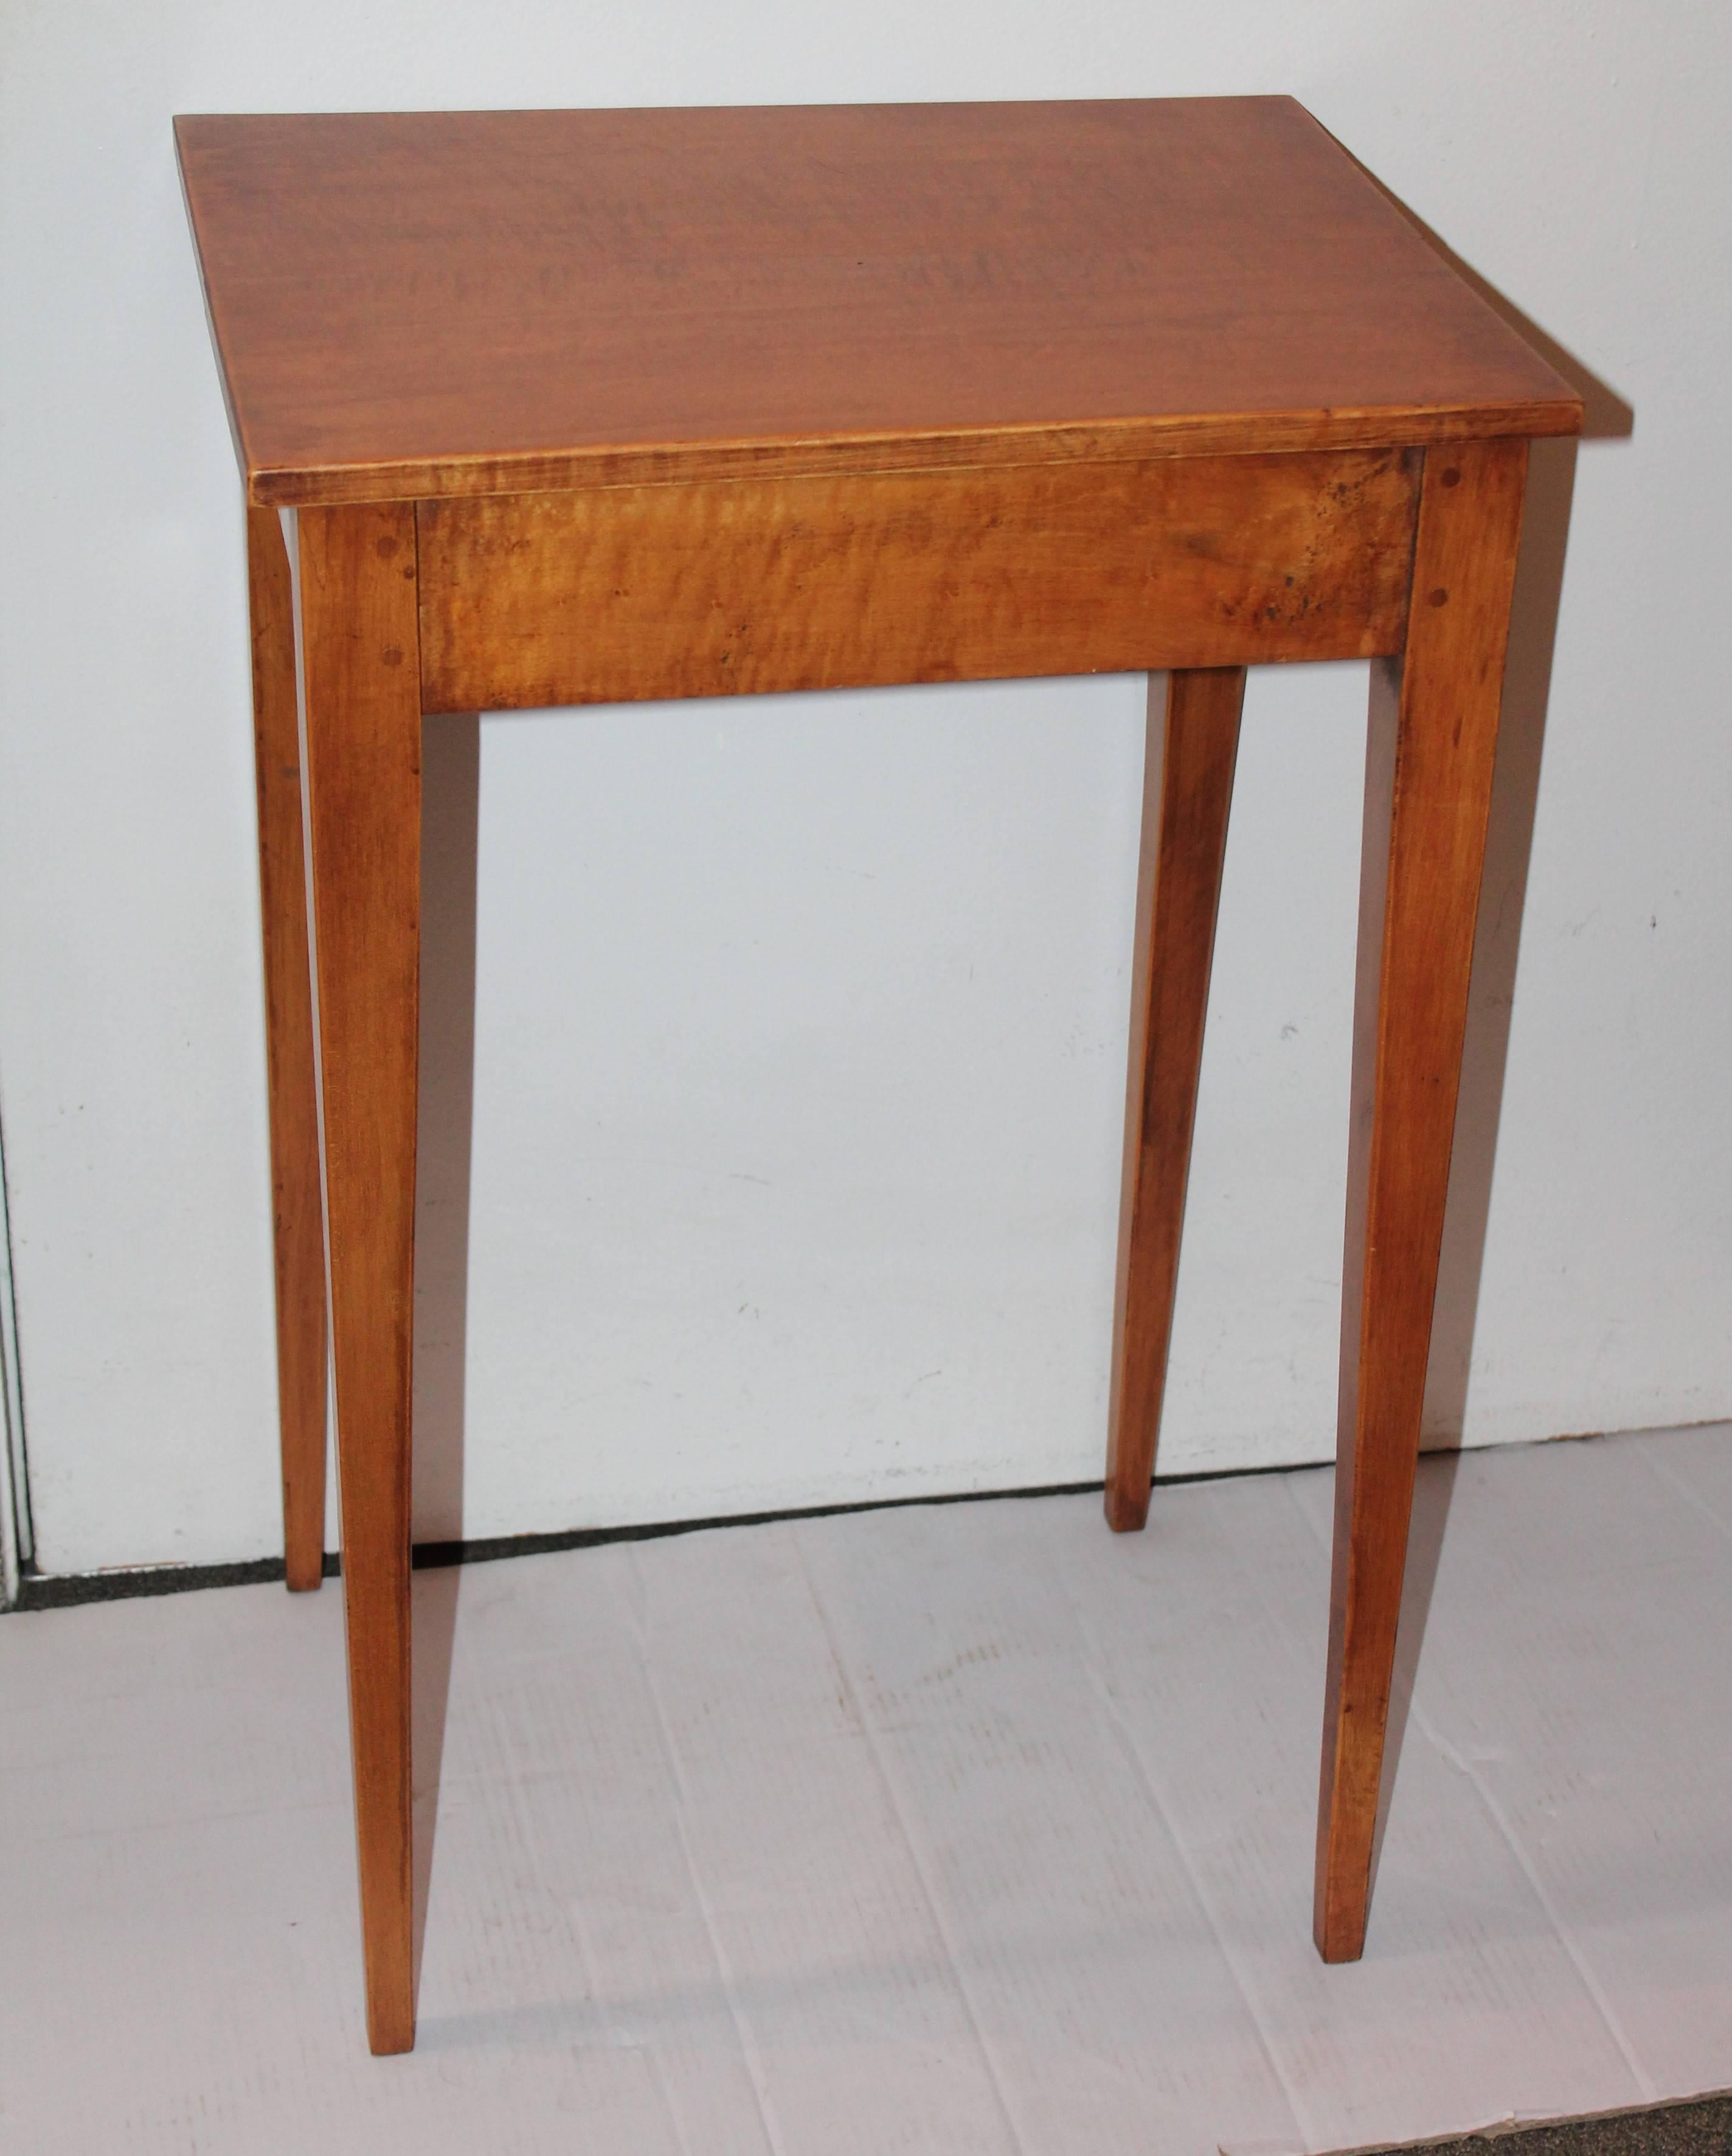 This fine simple lines taper leg table is in the form of Shaker furniture. It is a shaker style form with nice early wood peg construction. The condition is very good.